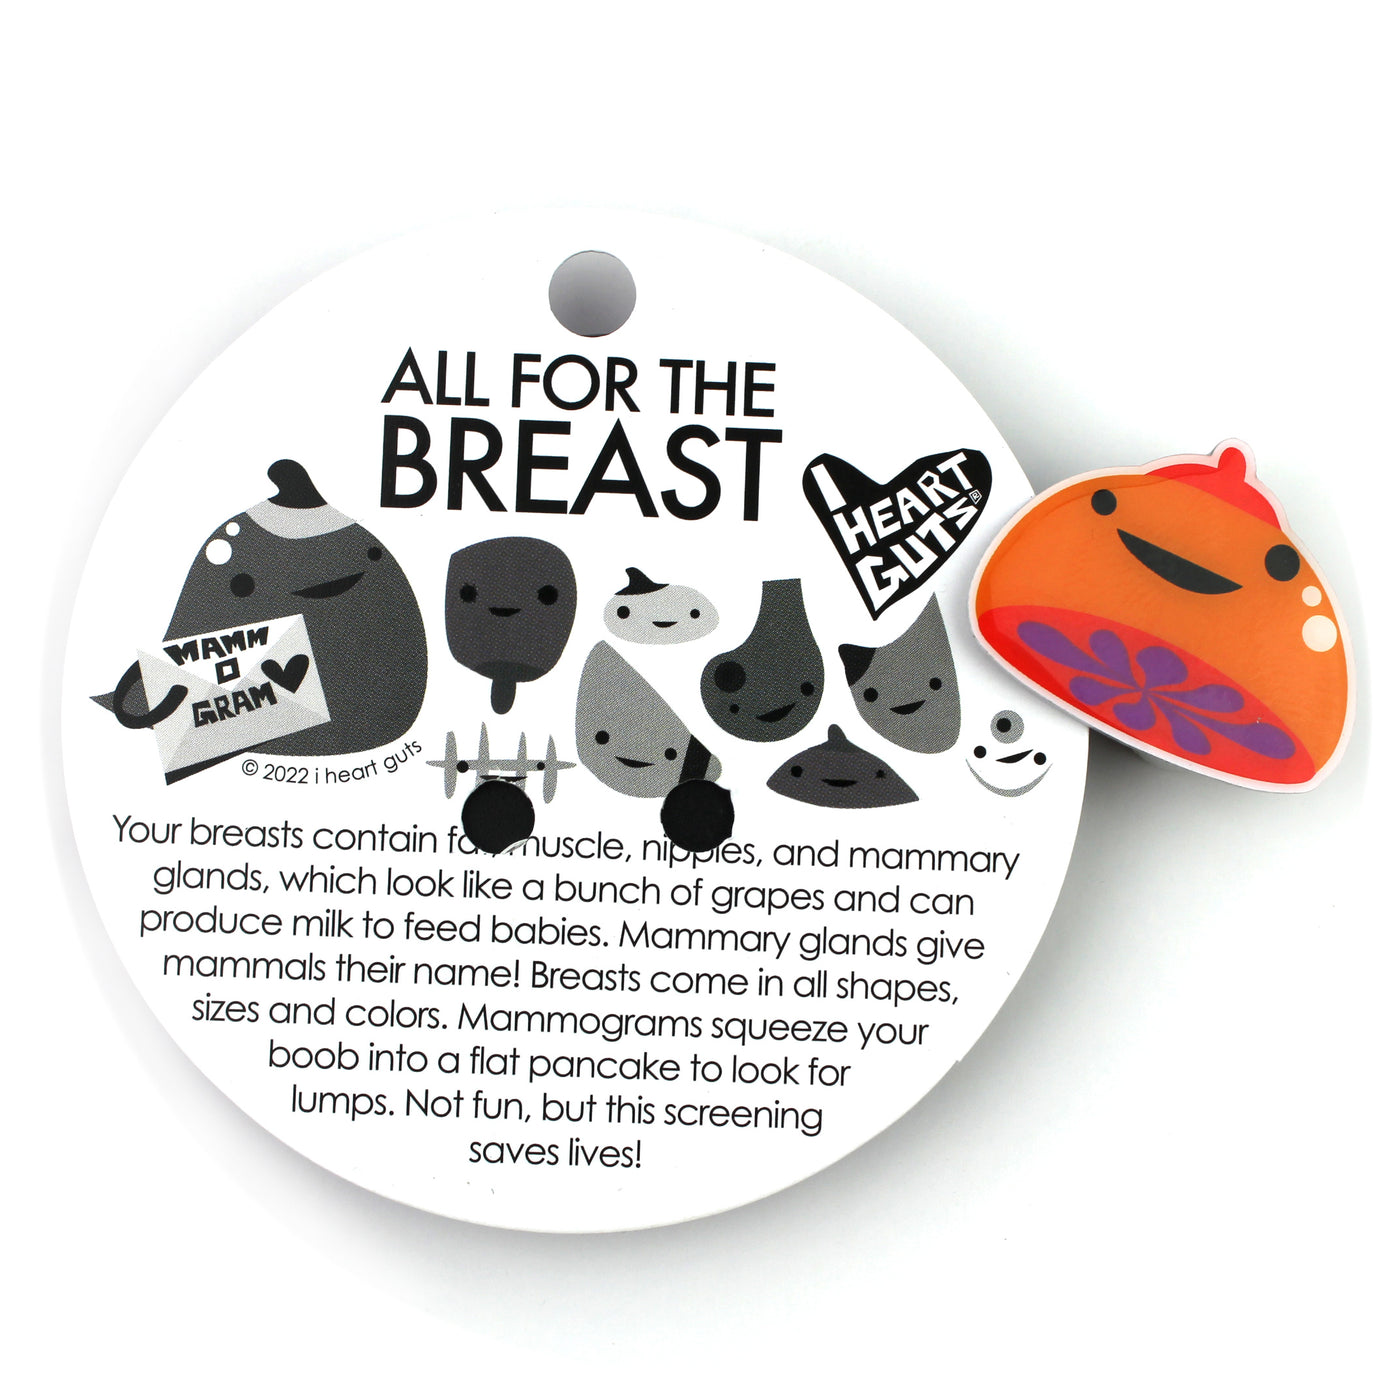 breast enamel pin breast-cancer cute funny mastectomy chemo radiation humor gift mammogram breast early detection awareness giveaways educational